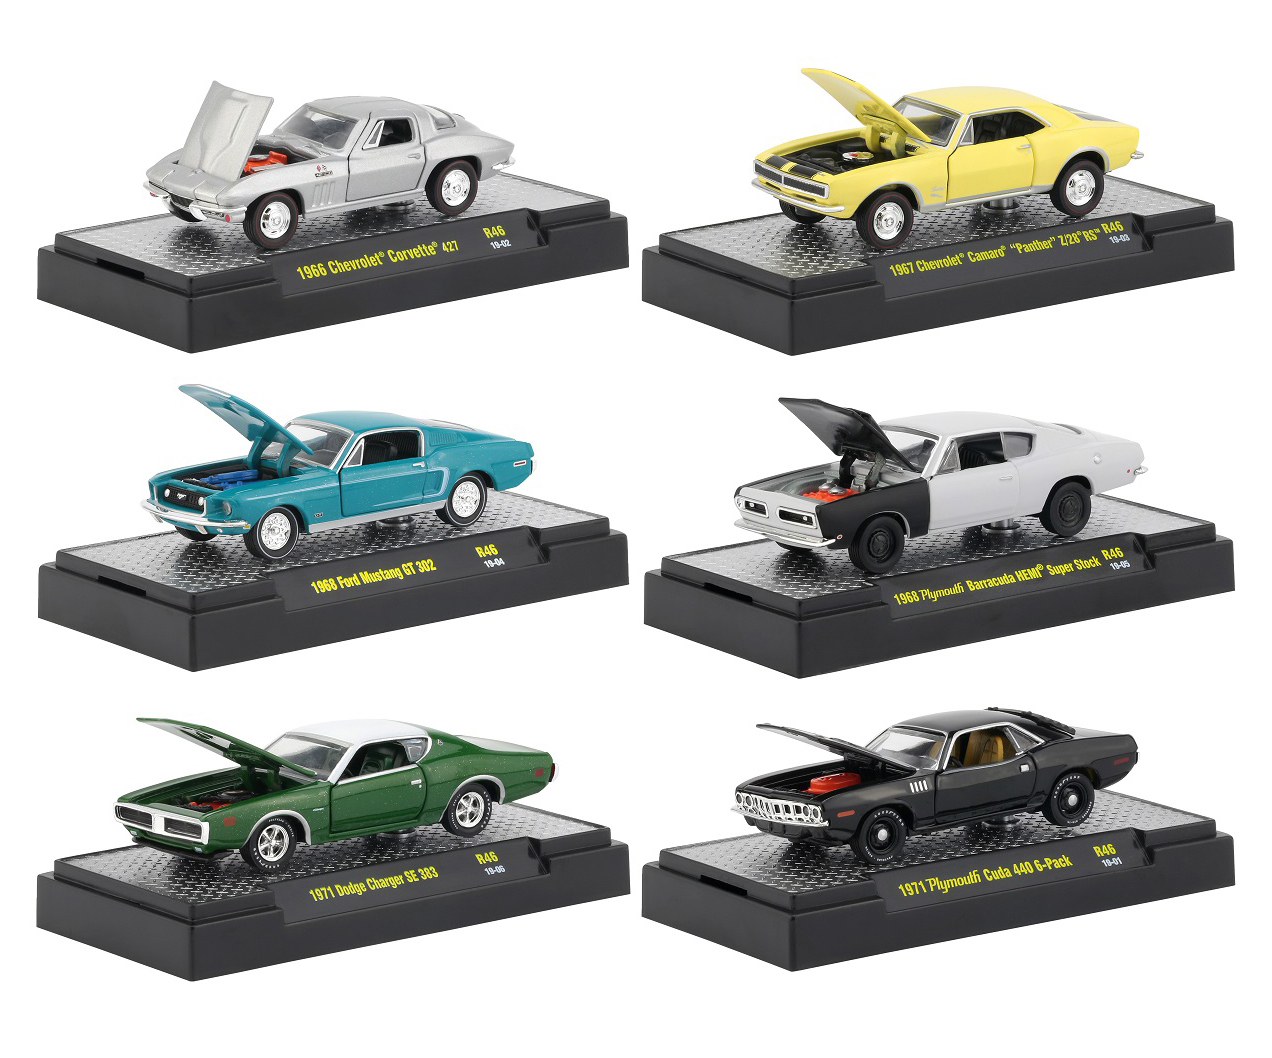 Detroit Muscle Release 46 6 Cars Set In Display Cases 1/64 Diecast Model Cars By M2 Machines